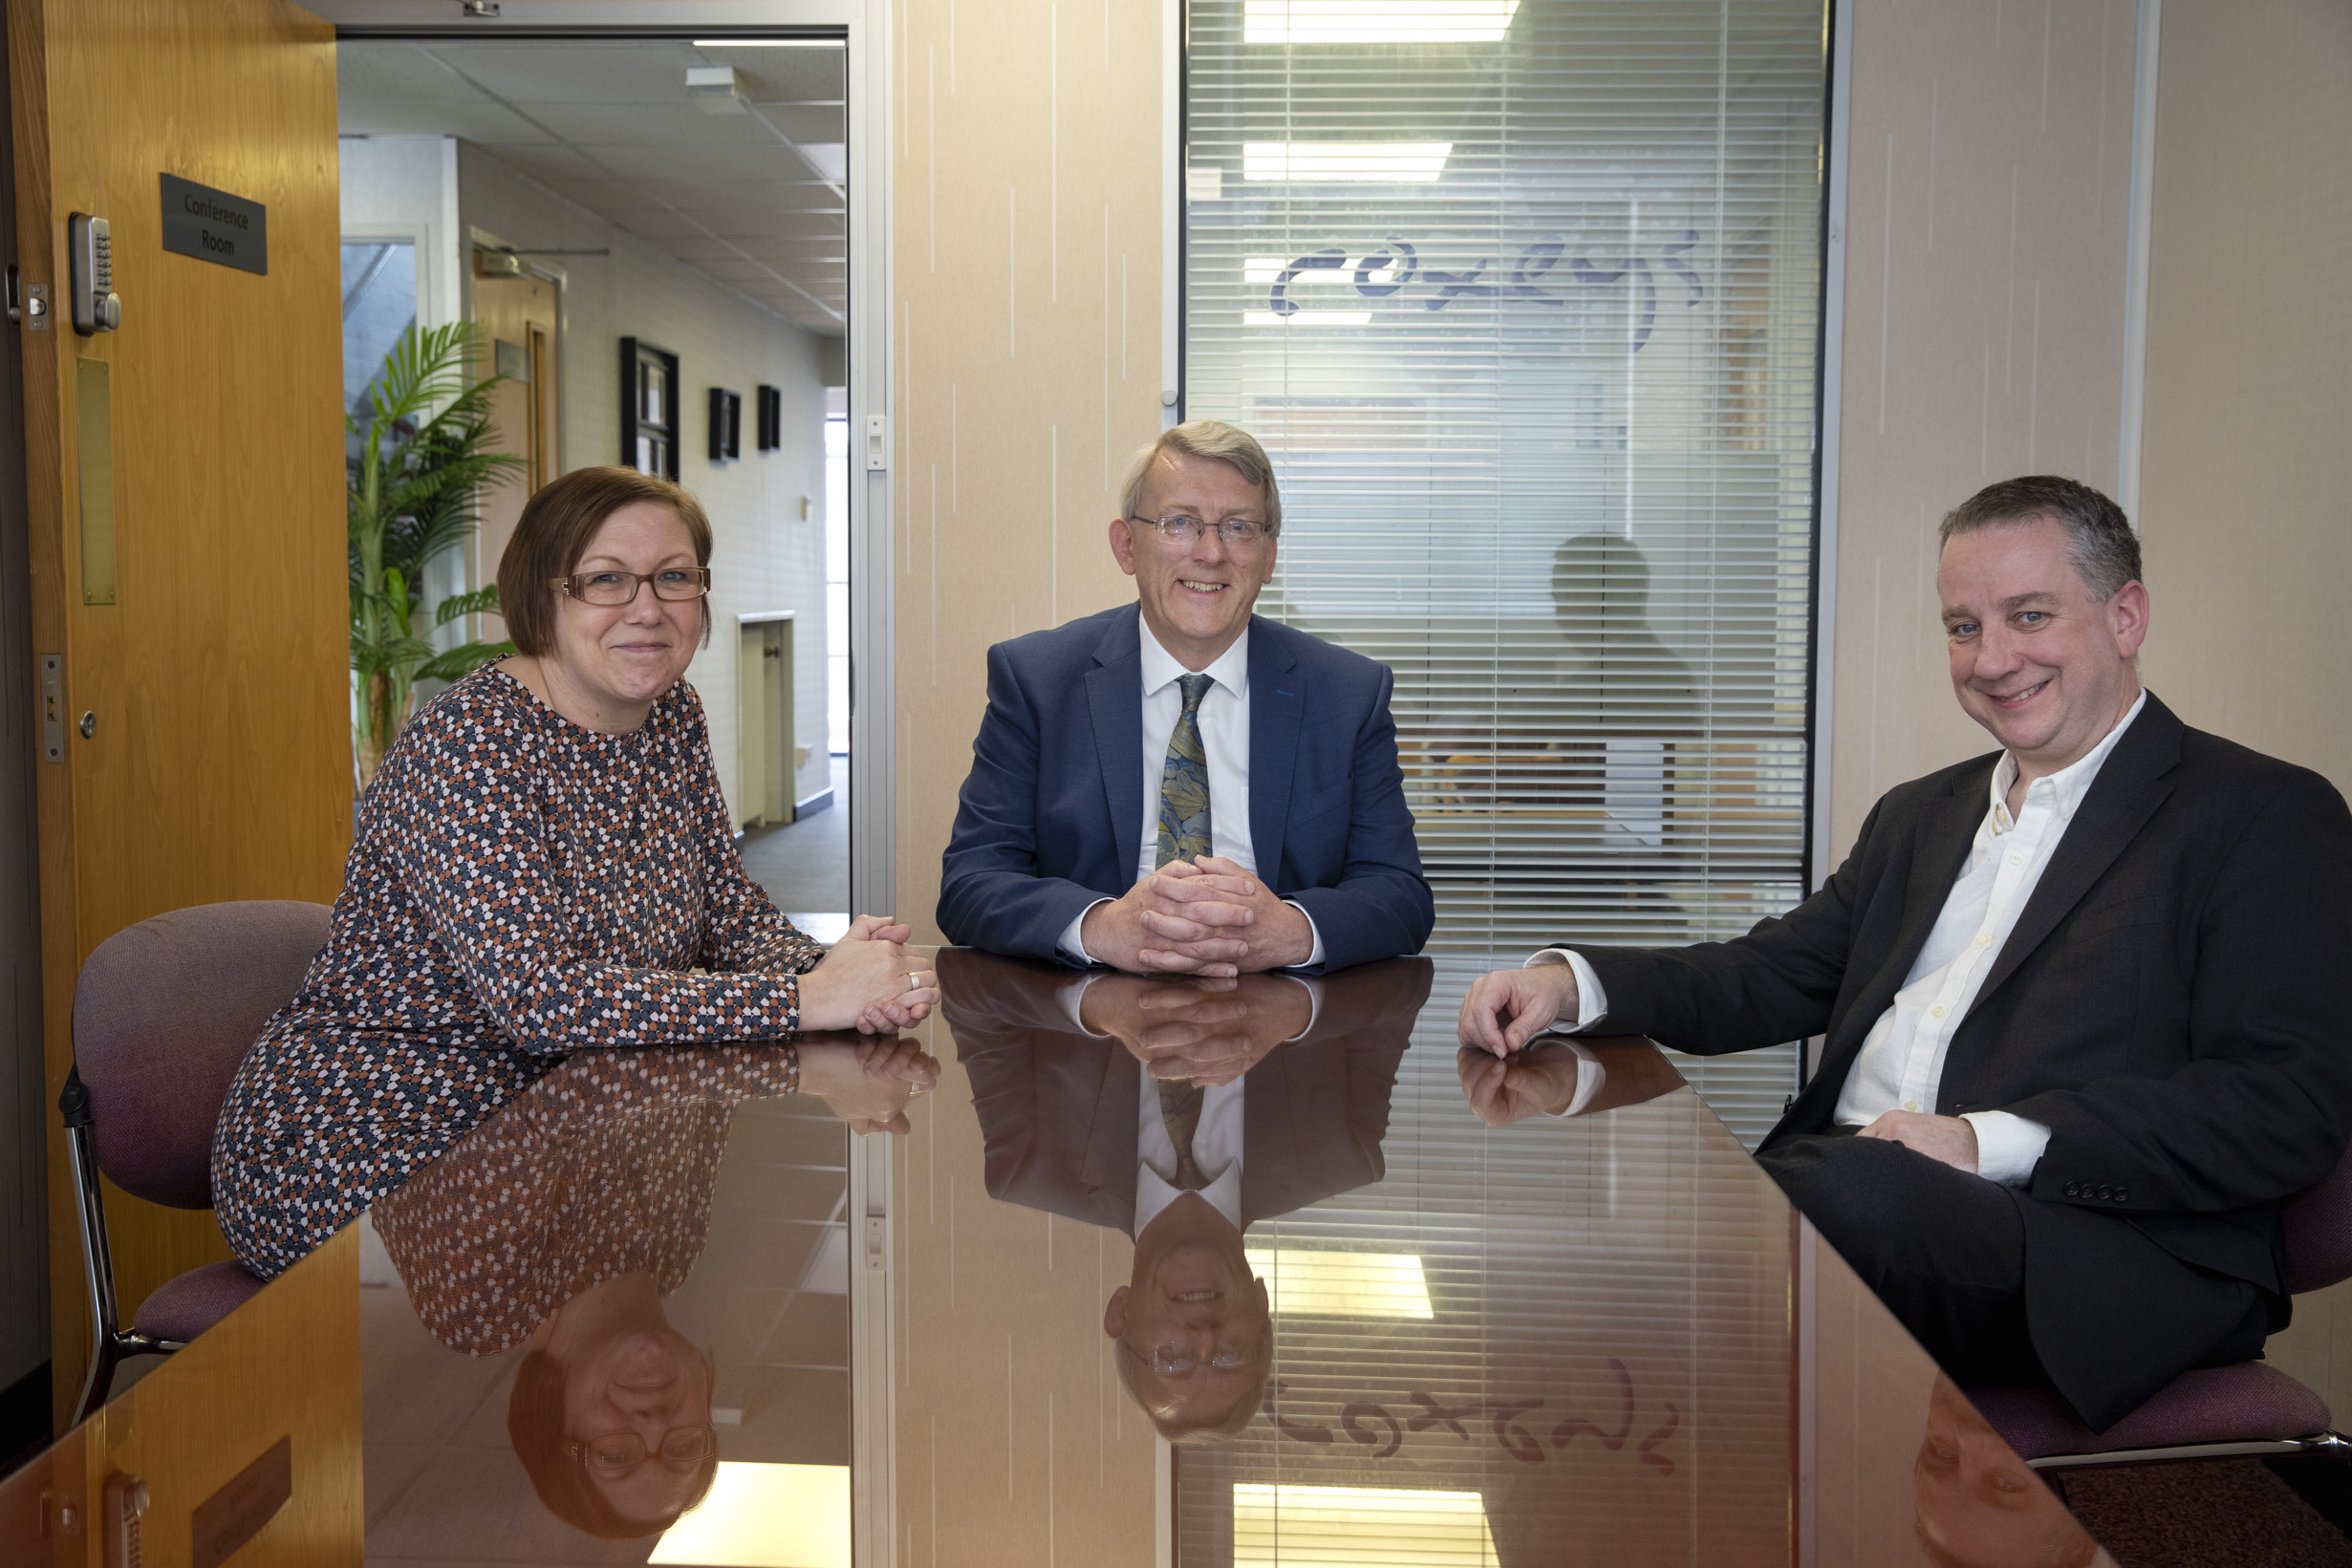 Merger adds up to expansion  for top accountancy firm